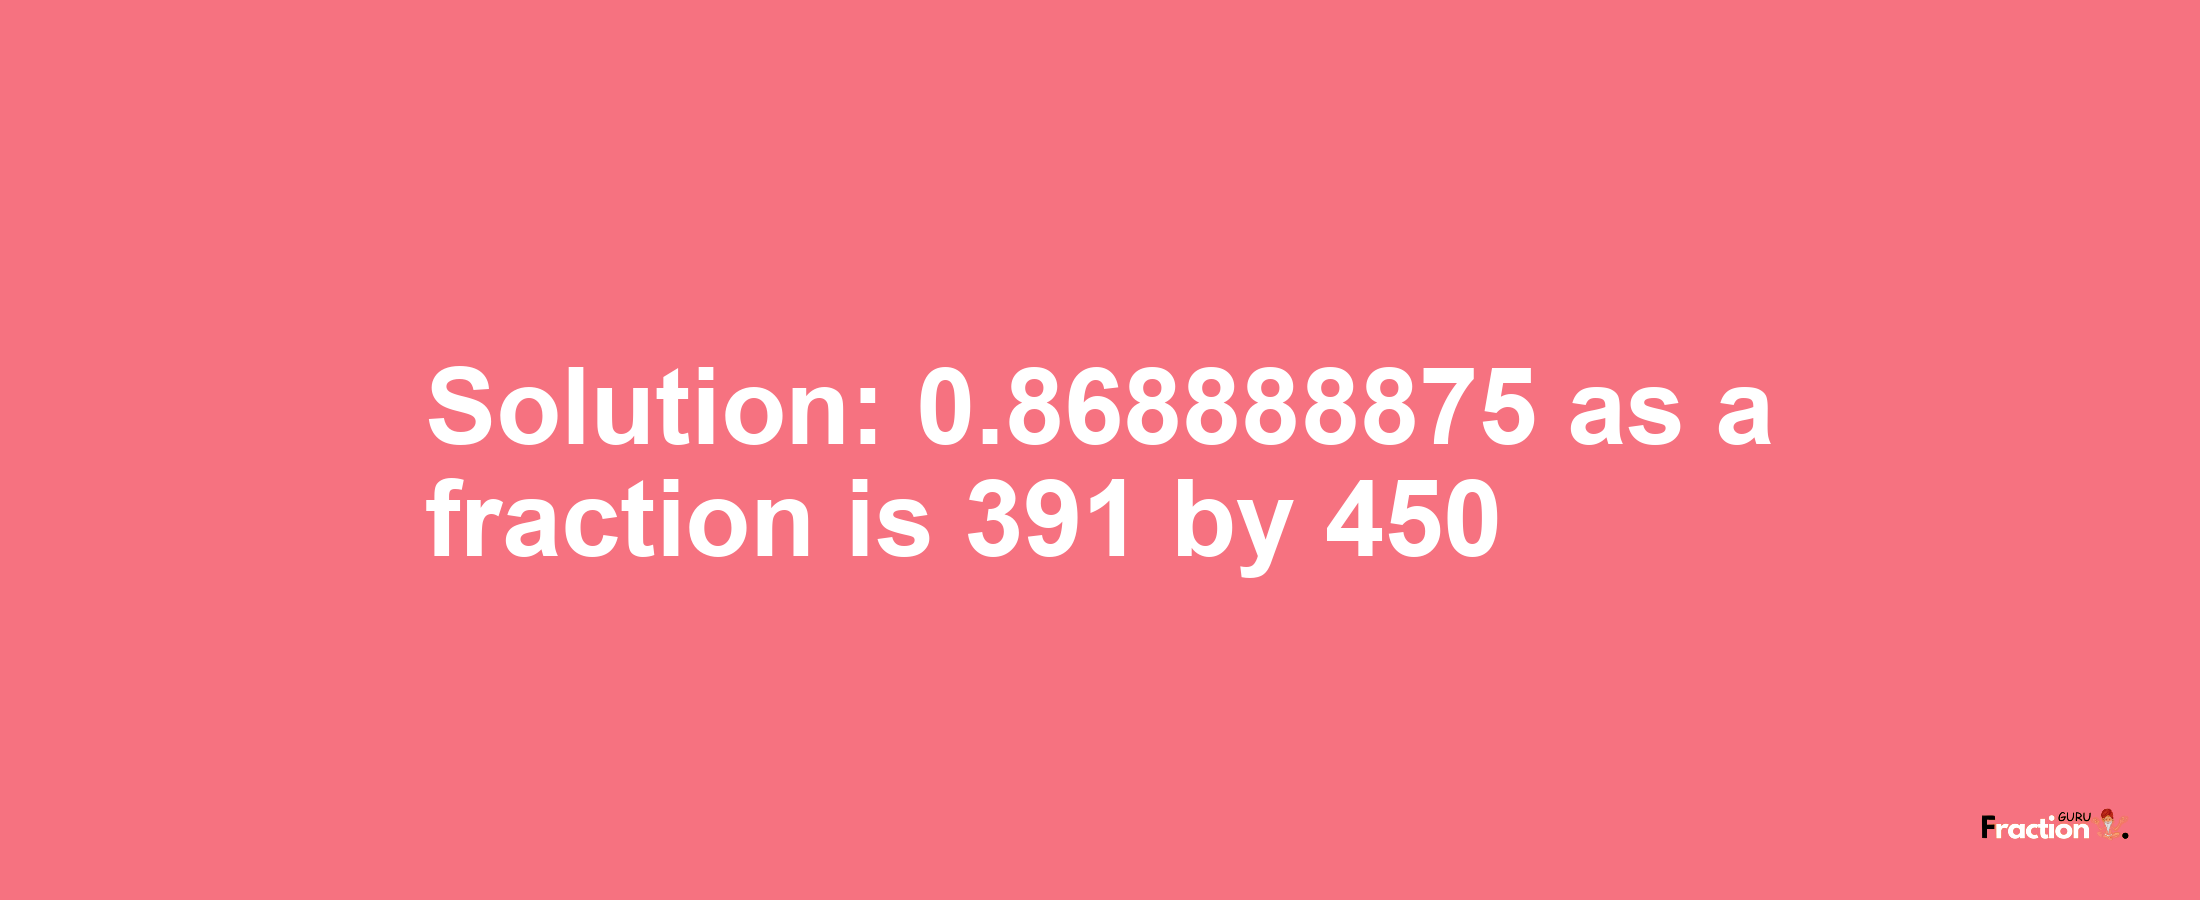 Solution:0.868888875 as a fraction is 391/450